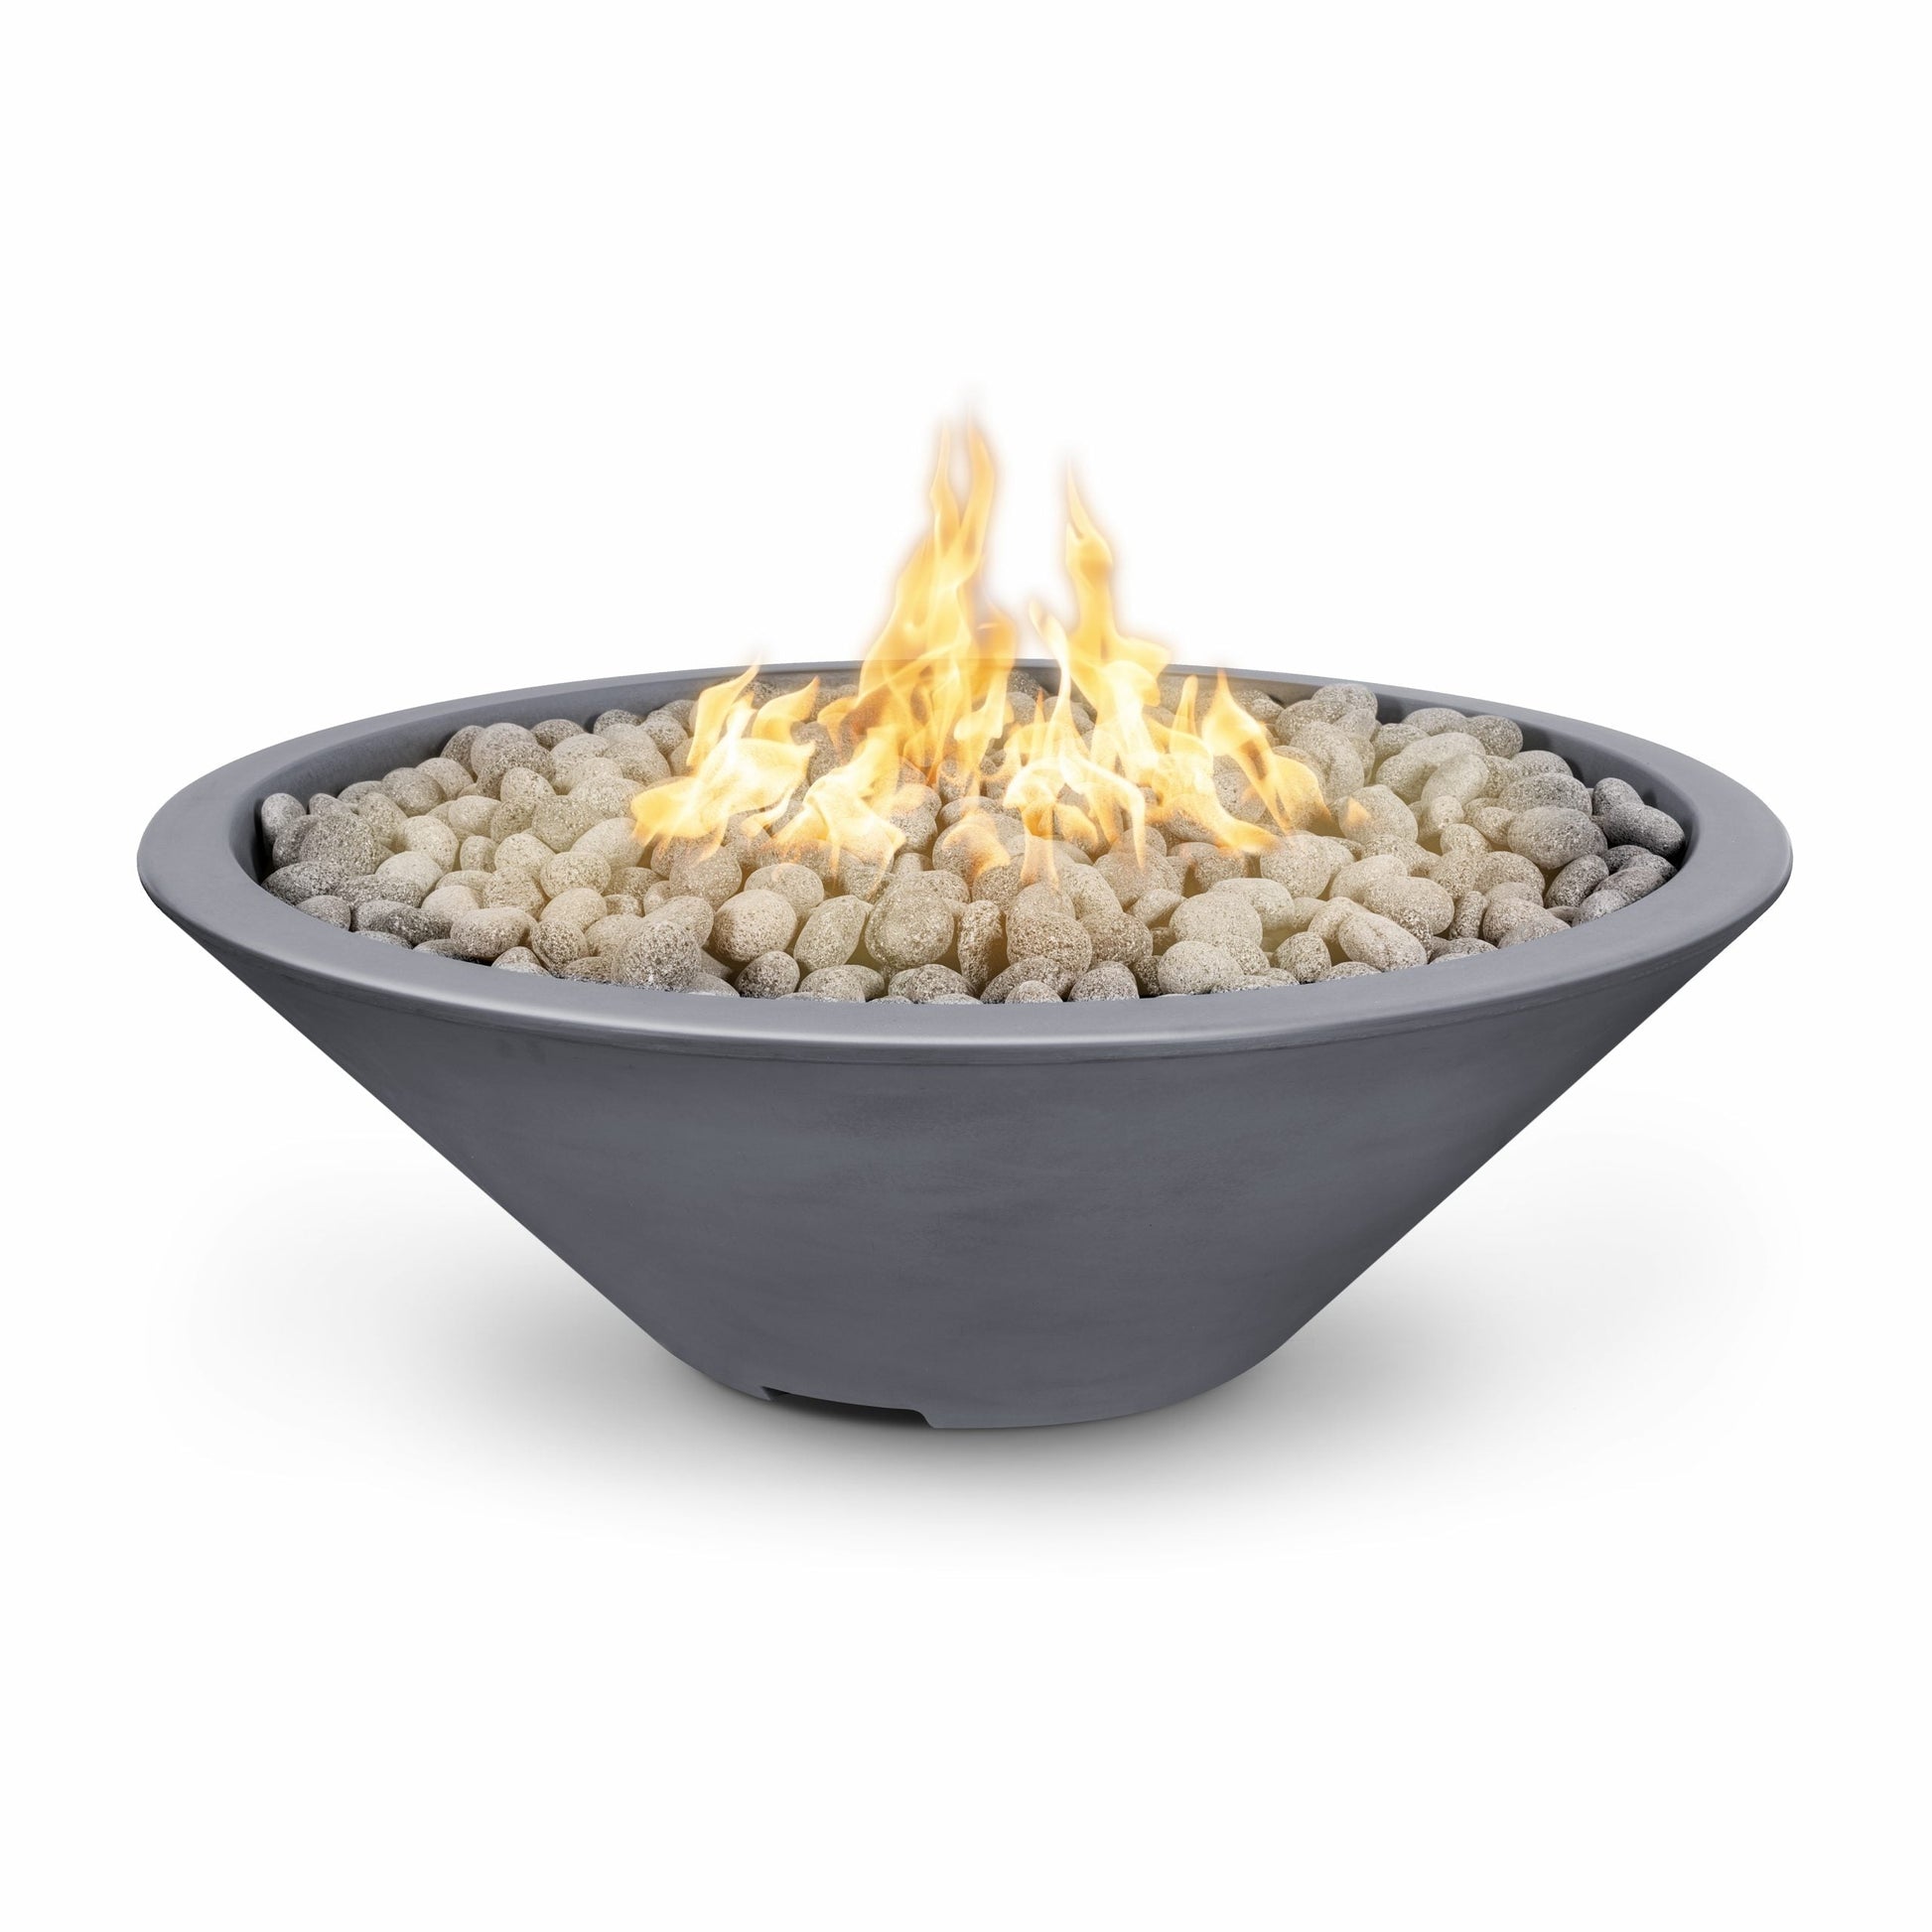 The Outdoor Plus Round Cazo 48" Black Powder Coated Metal Liquid Propane Fire Pit with Match Lit Ignition